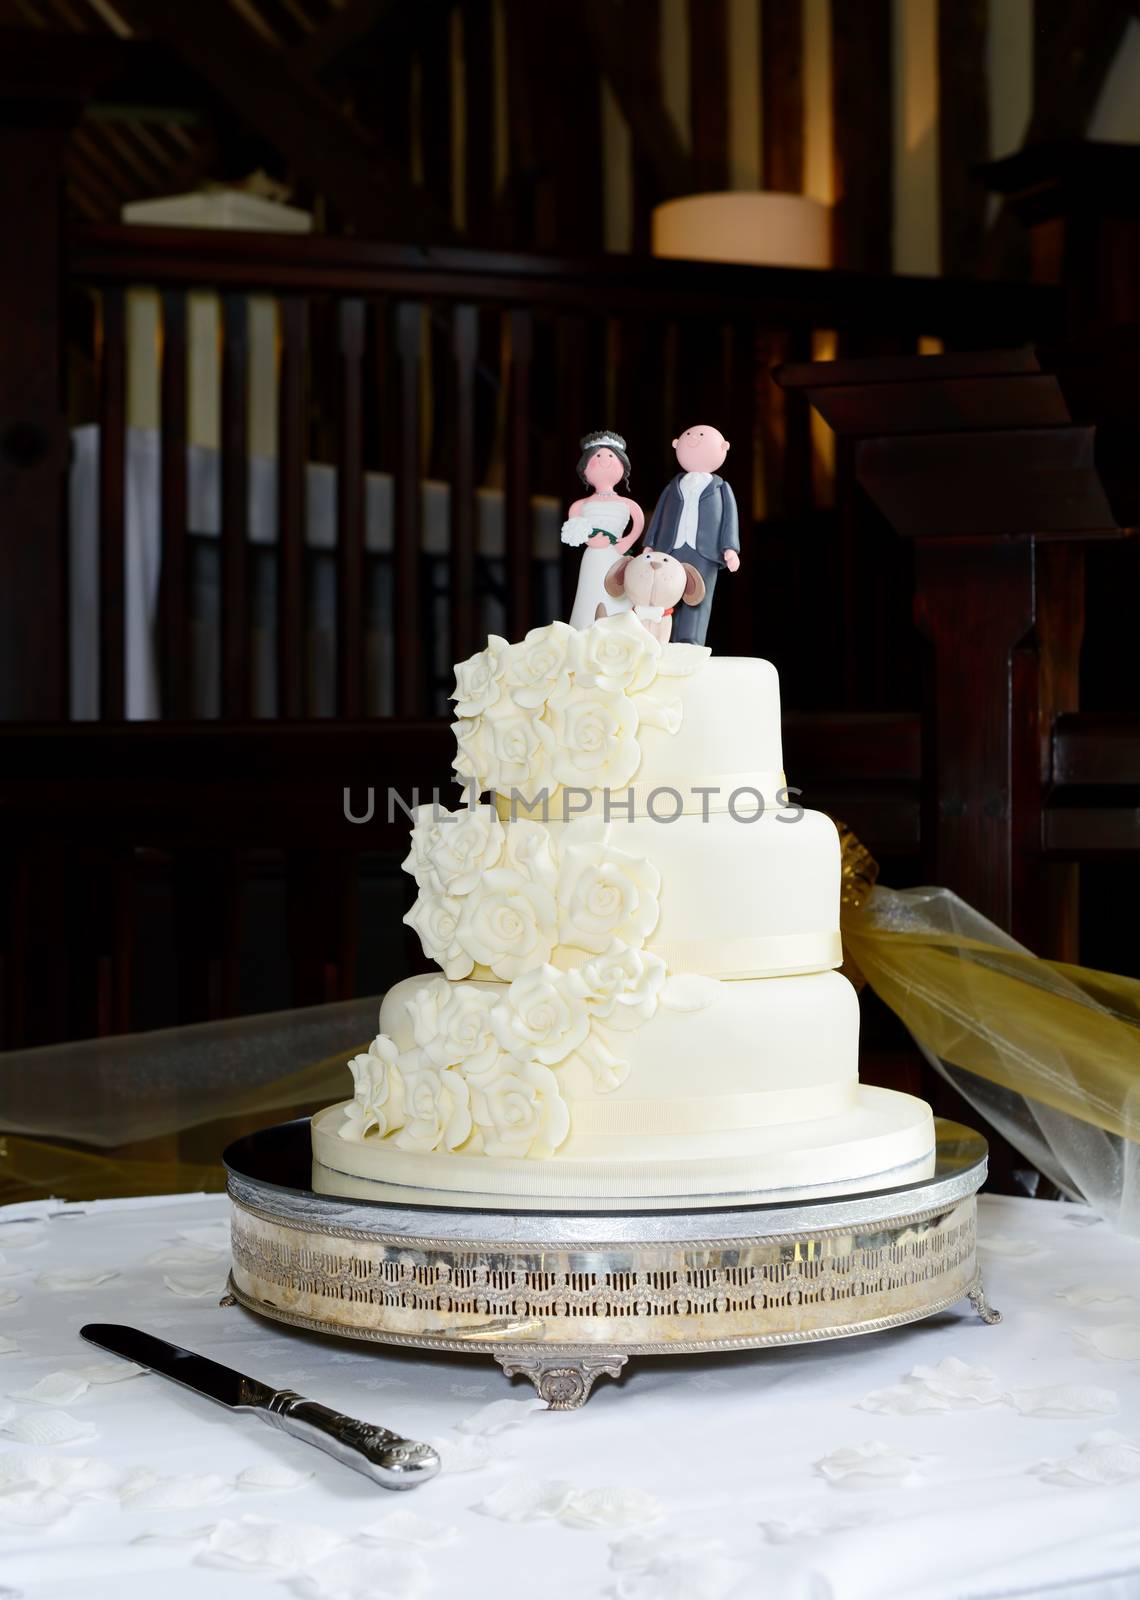 Wedding cake is three tier with topper showing couple and dog